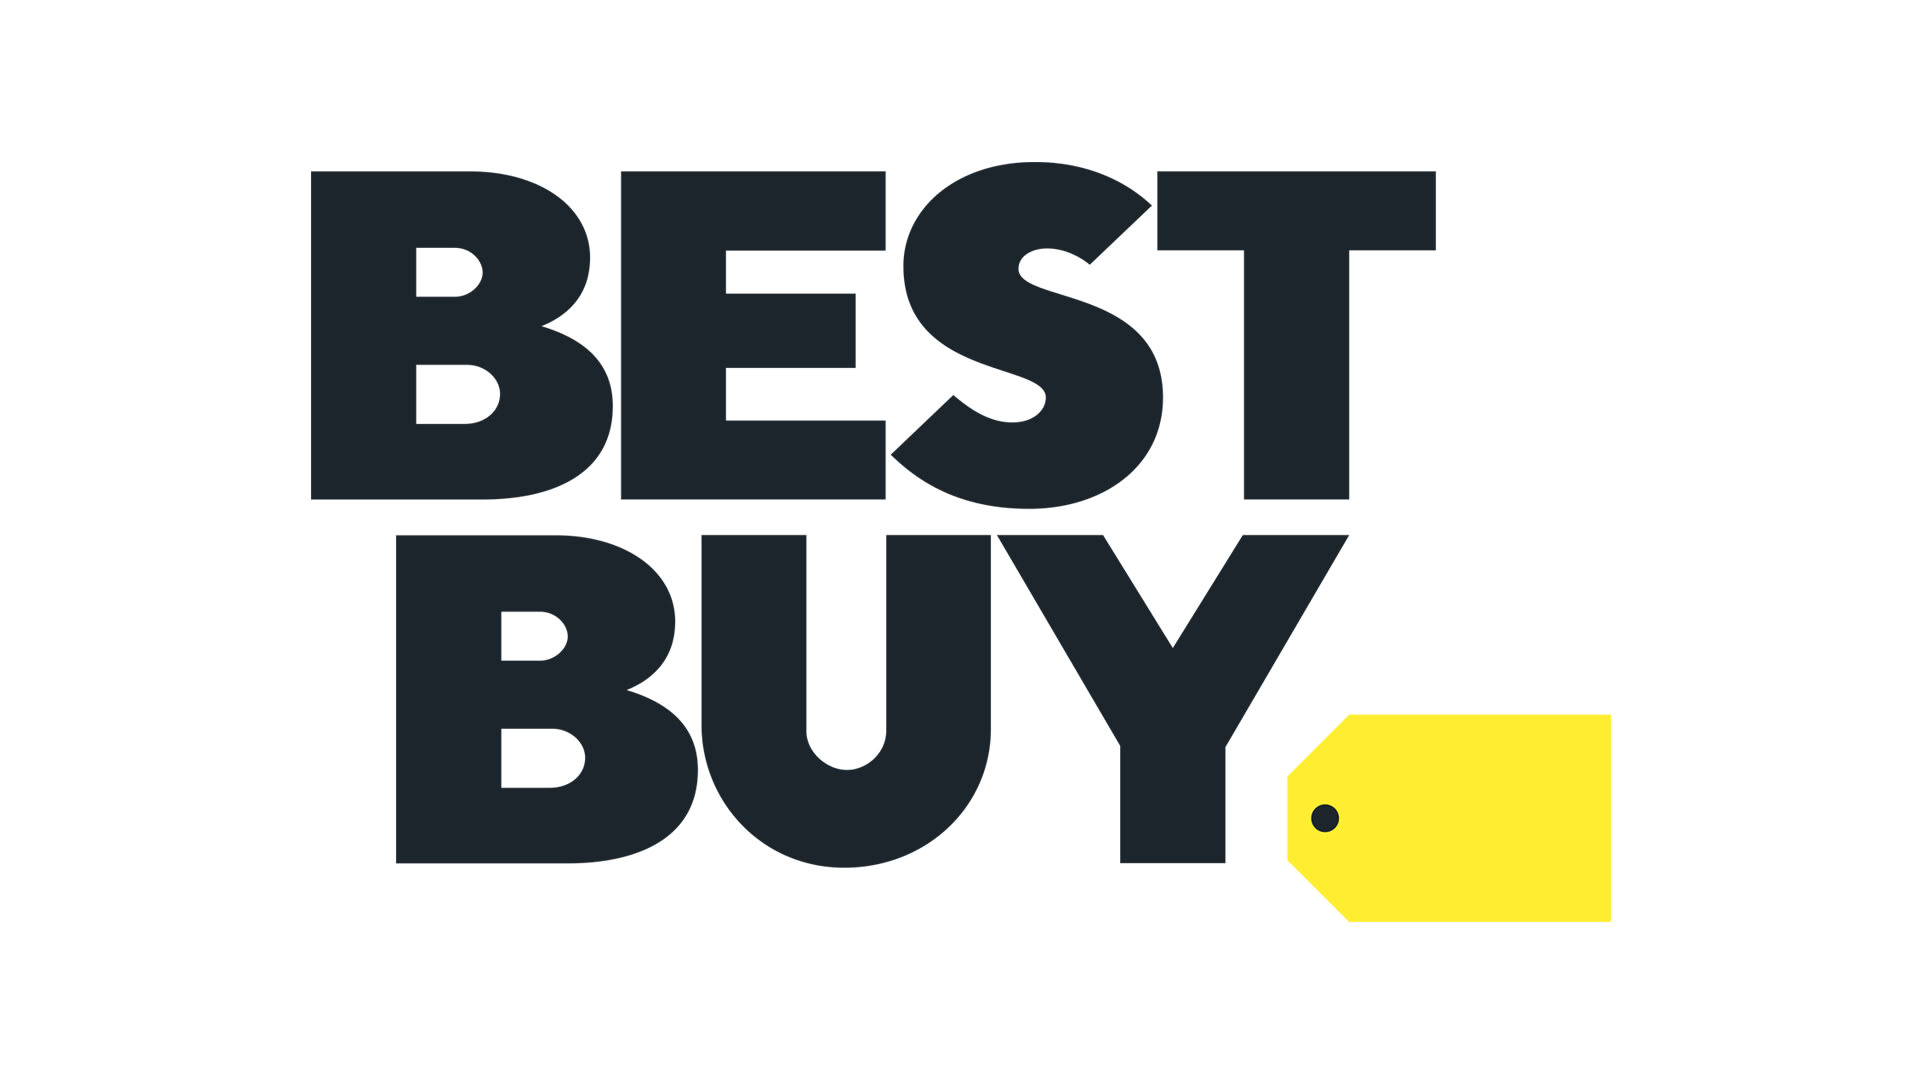 Click here to view more about this offer on the Best Buy website